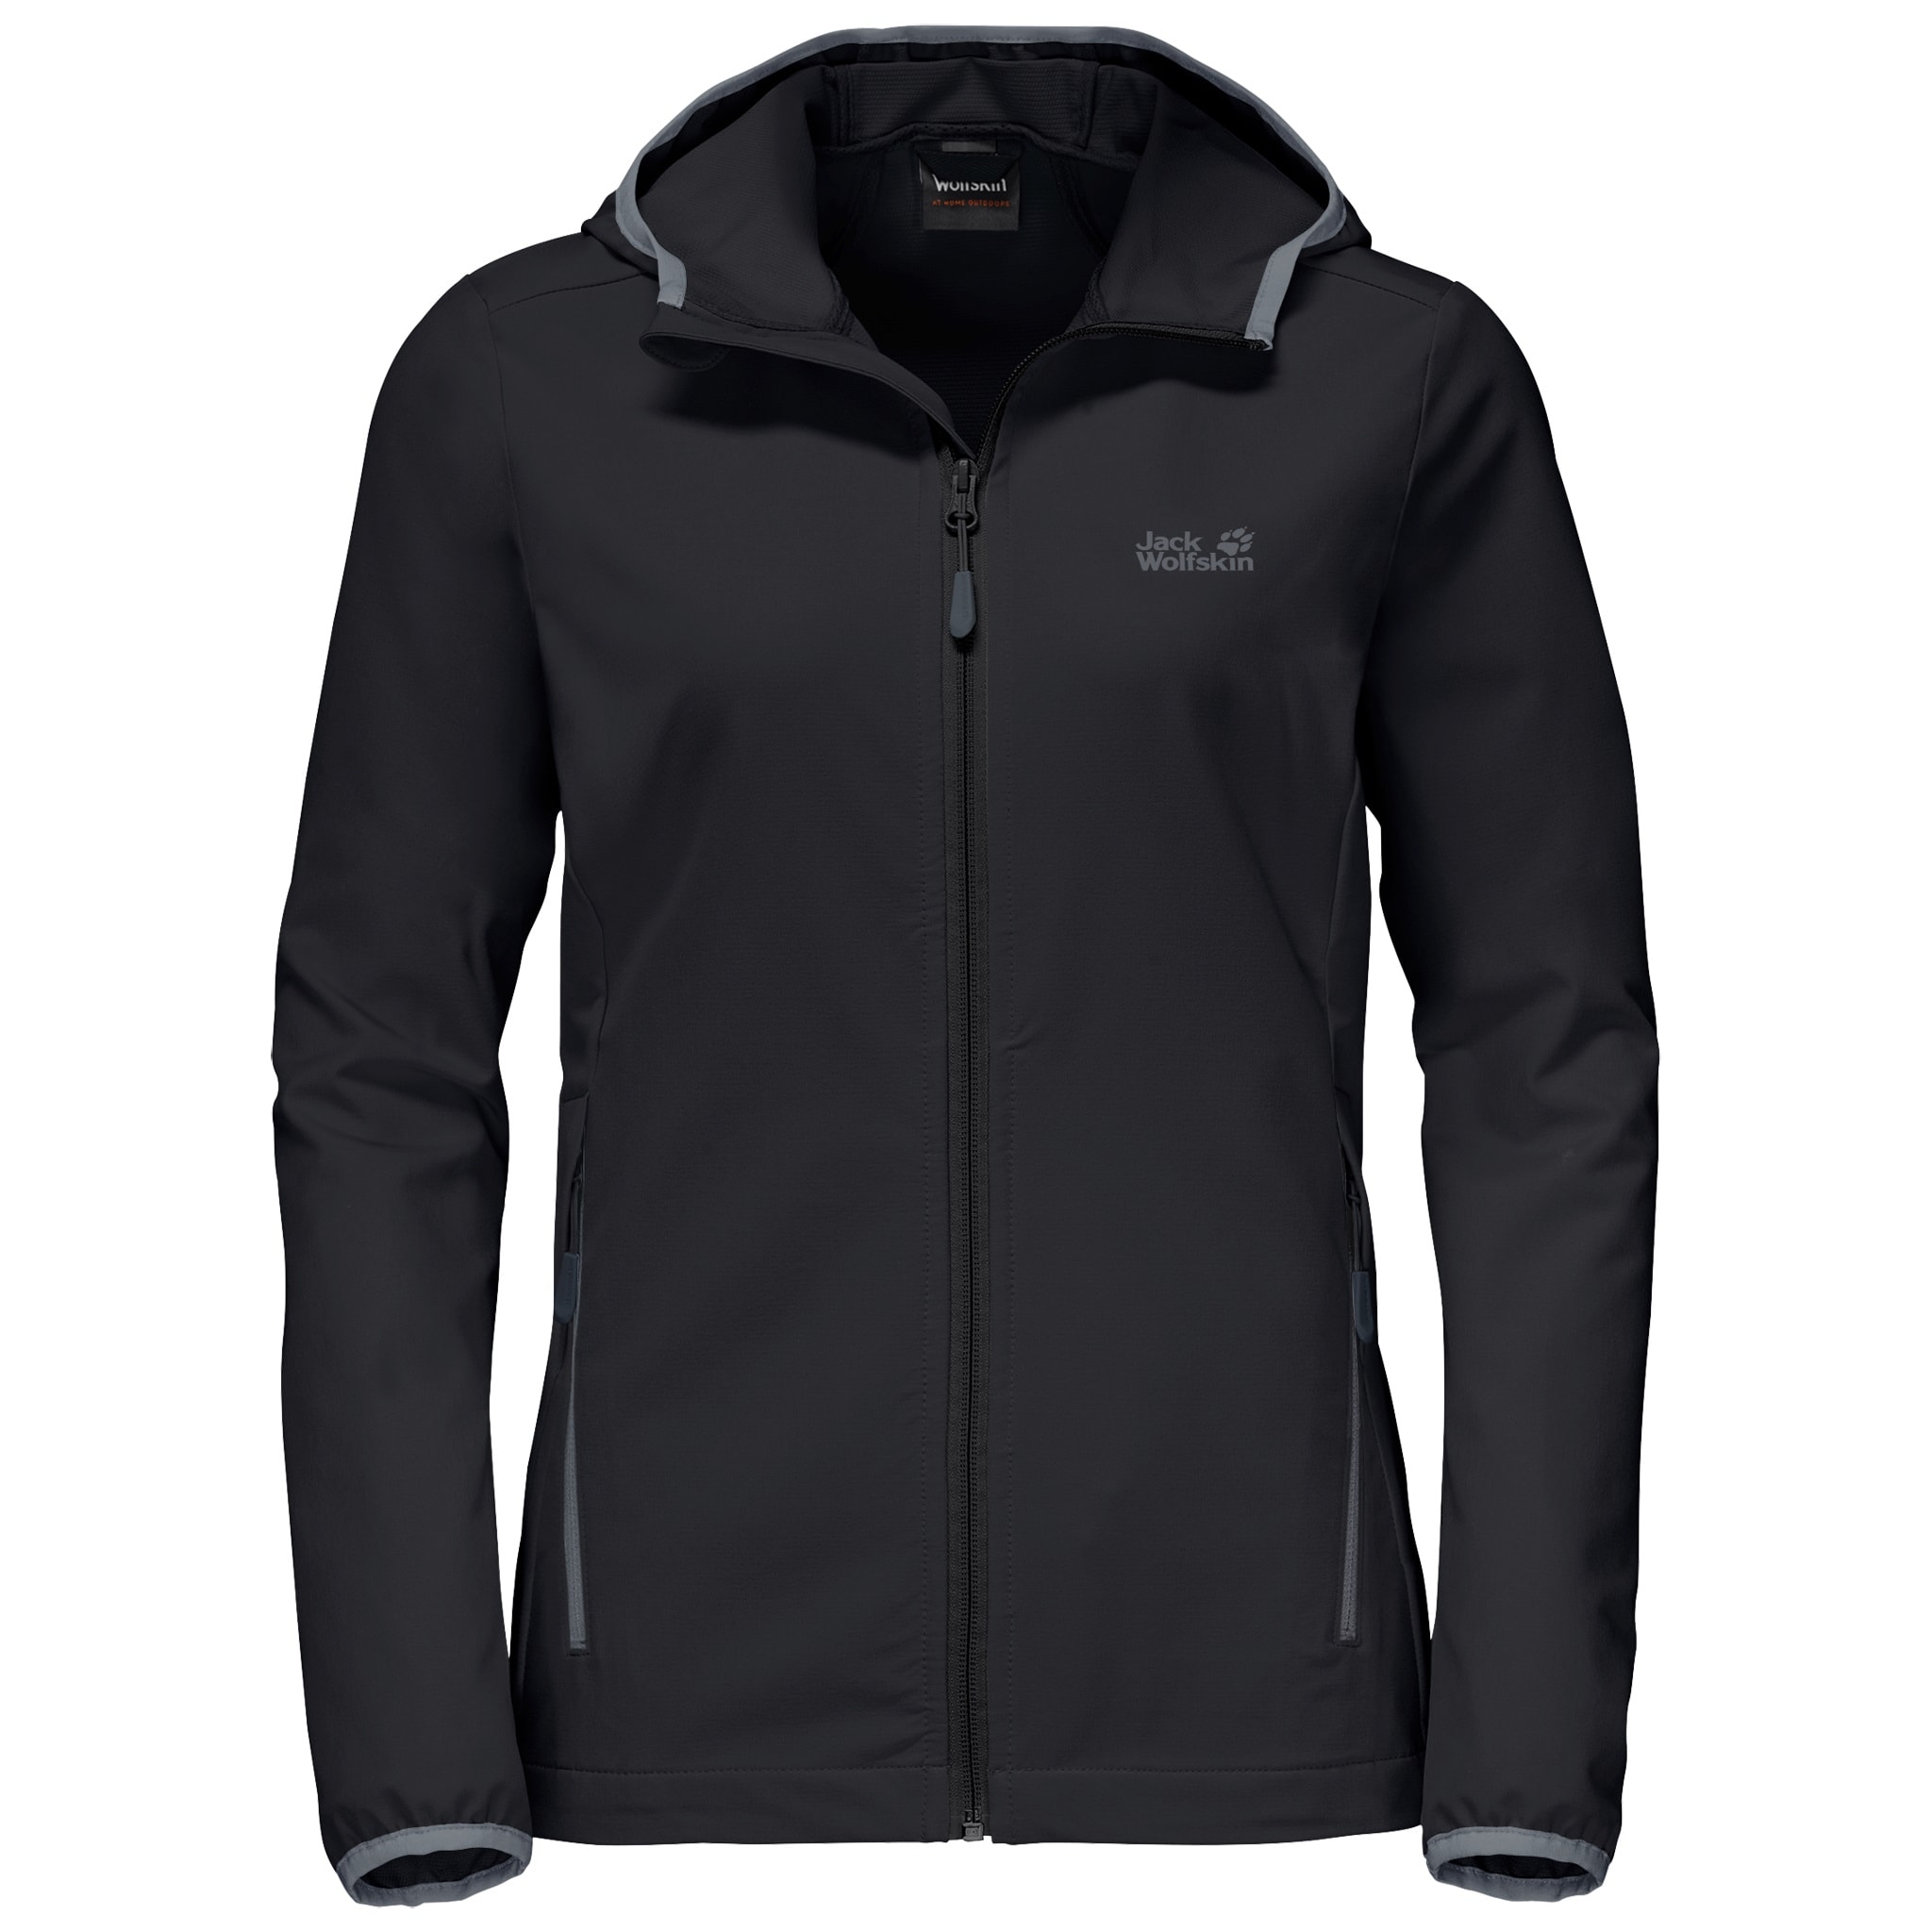 Buy Jack Wolfskin Turbulence Jacket Women's from Outnorth